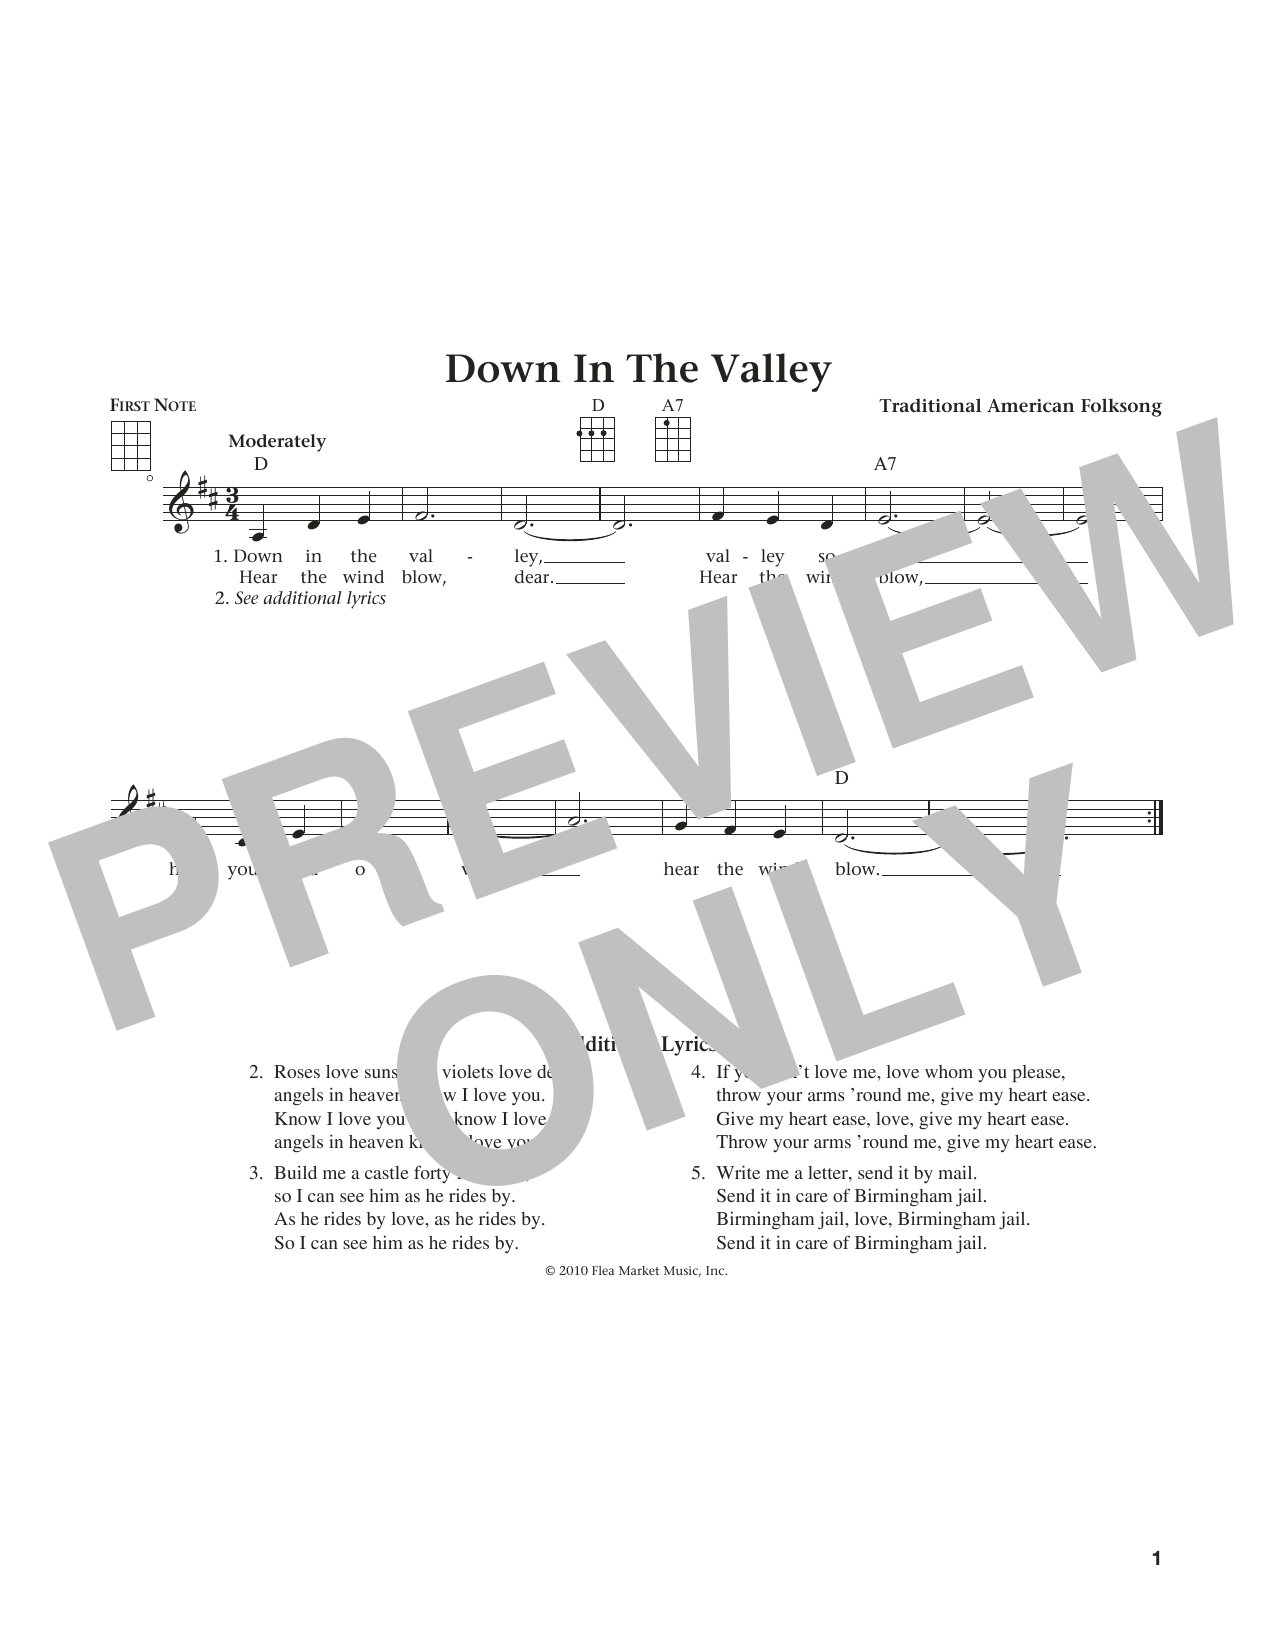 Download Traditional American Folksong Down In The Valley (from The Daily Ukul Sheet Music